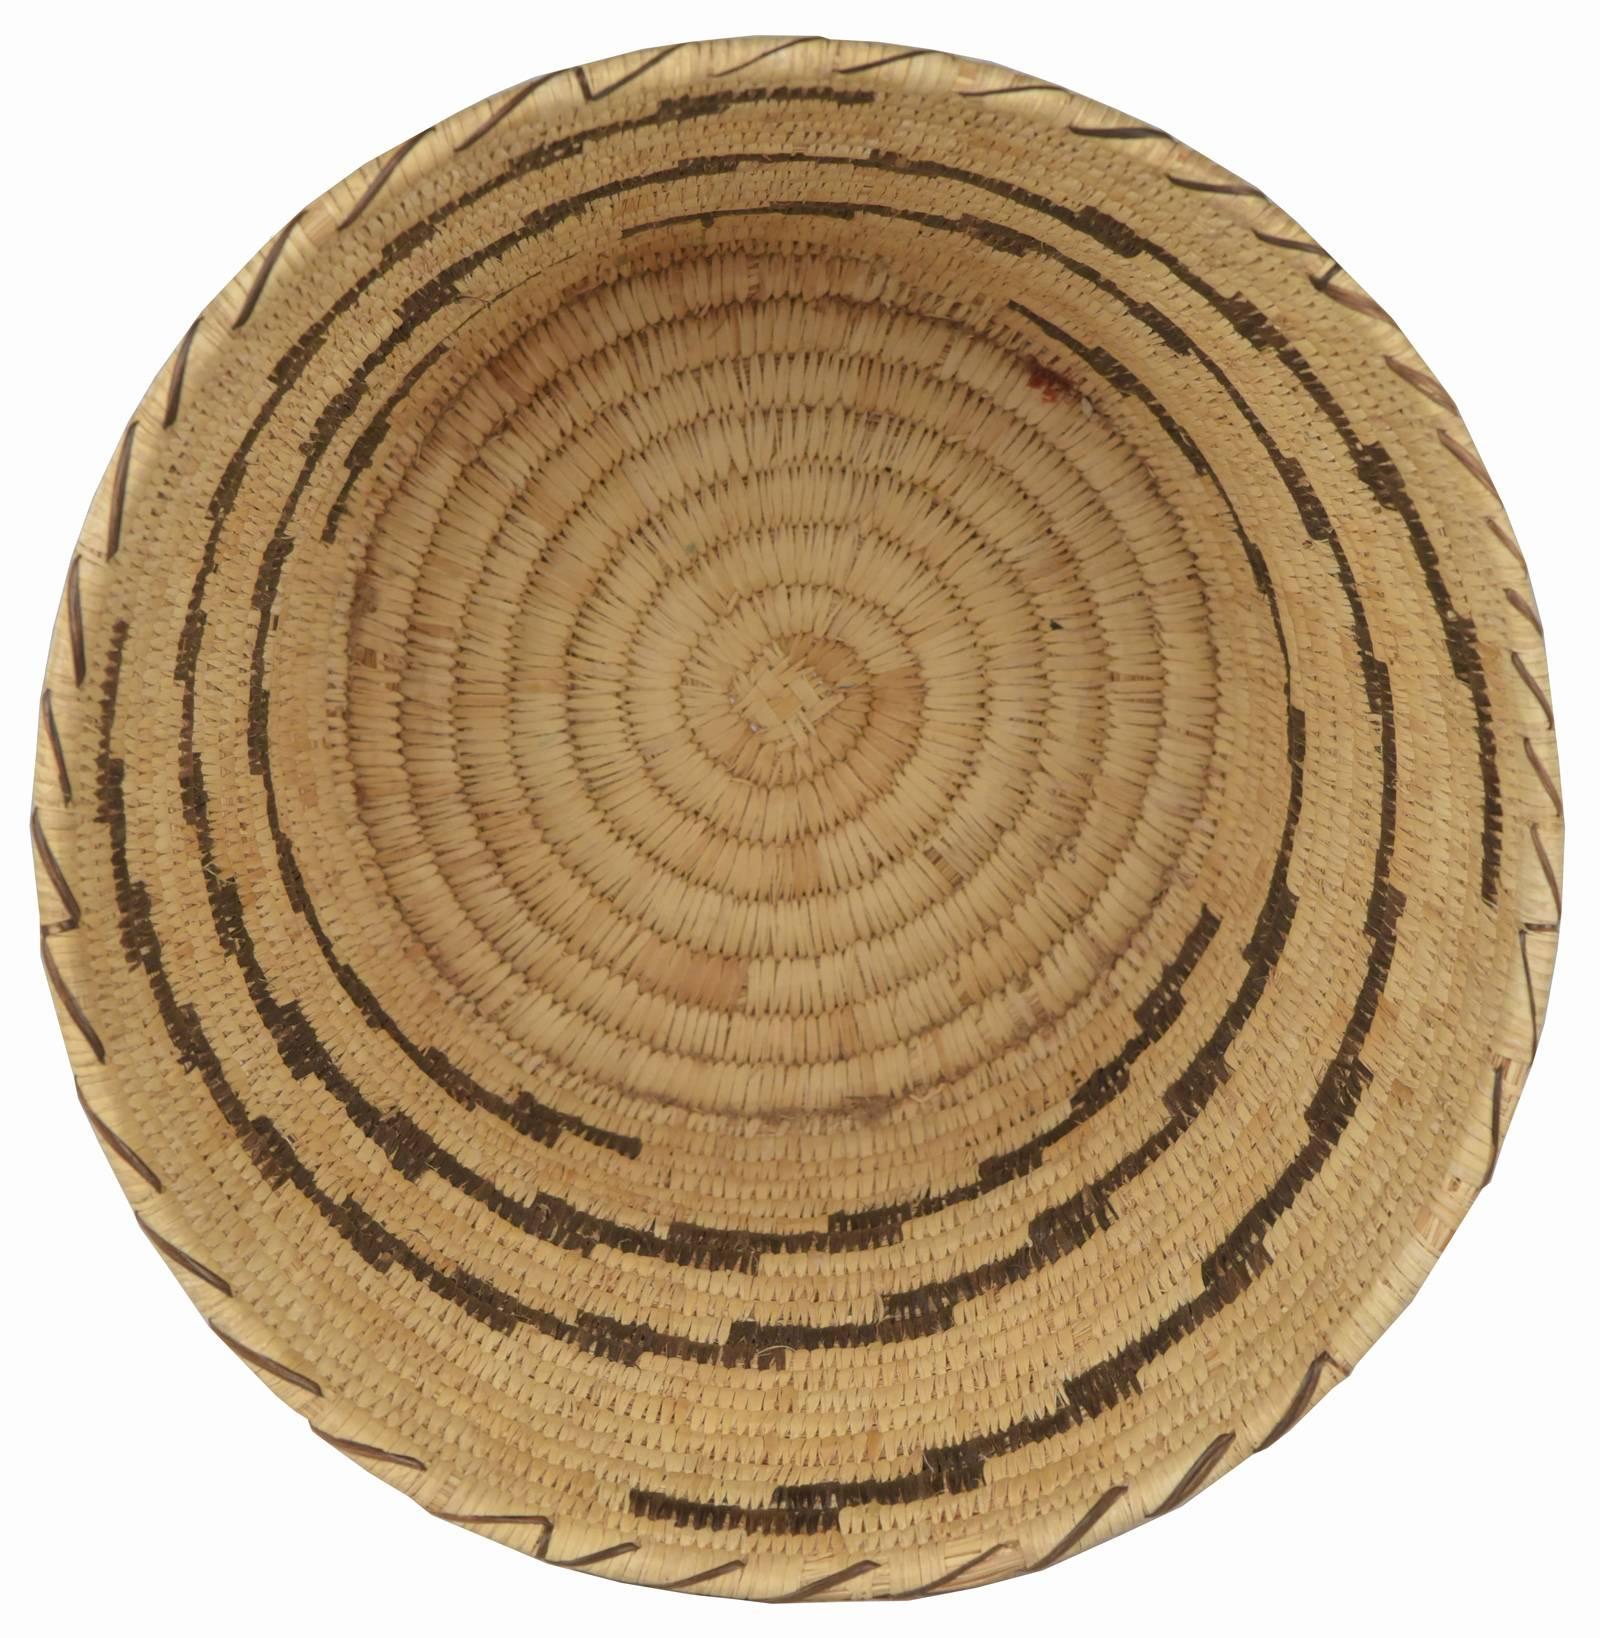 An early 20th century handwoven native American open basket of cylindrical form from the Tohono O’ogham people of southern Arizona, formerly known as the Papago, with coil base and tightly woven body with brown stair-step detailing. Natural fibres